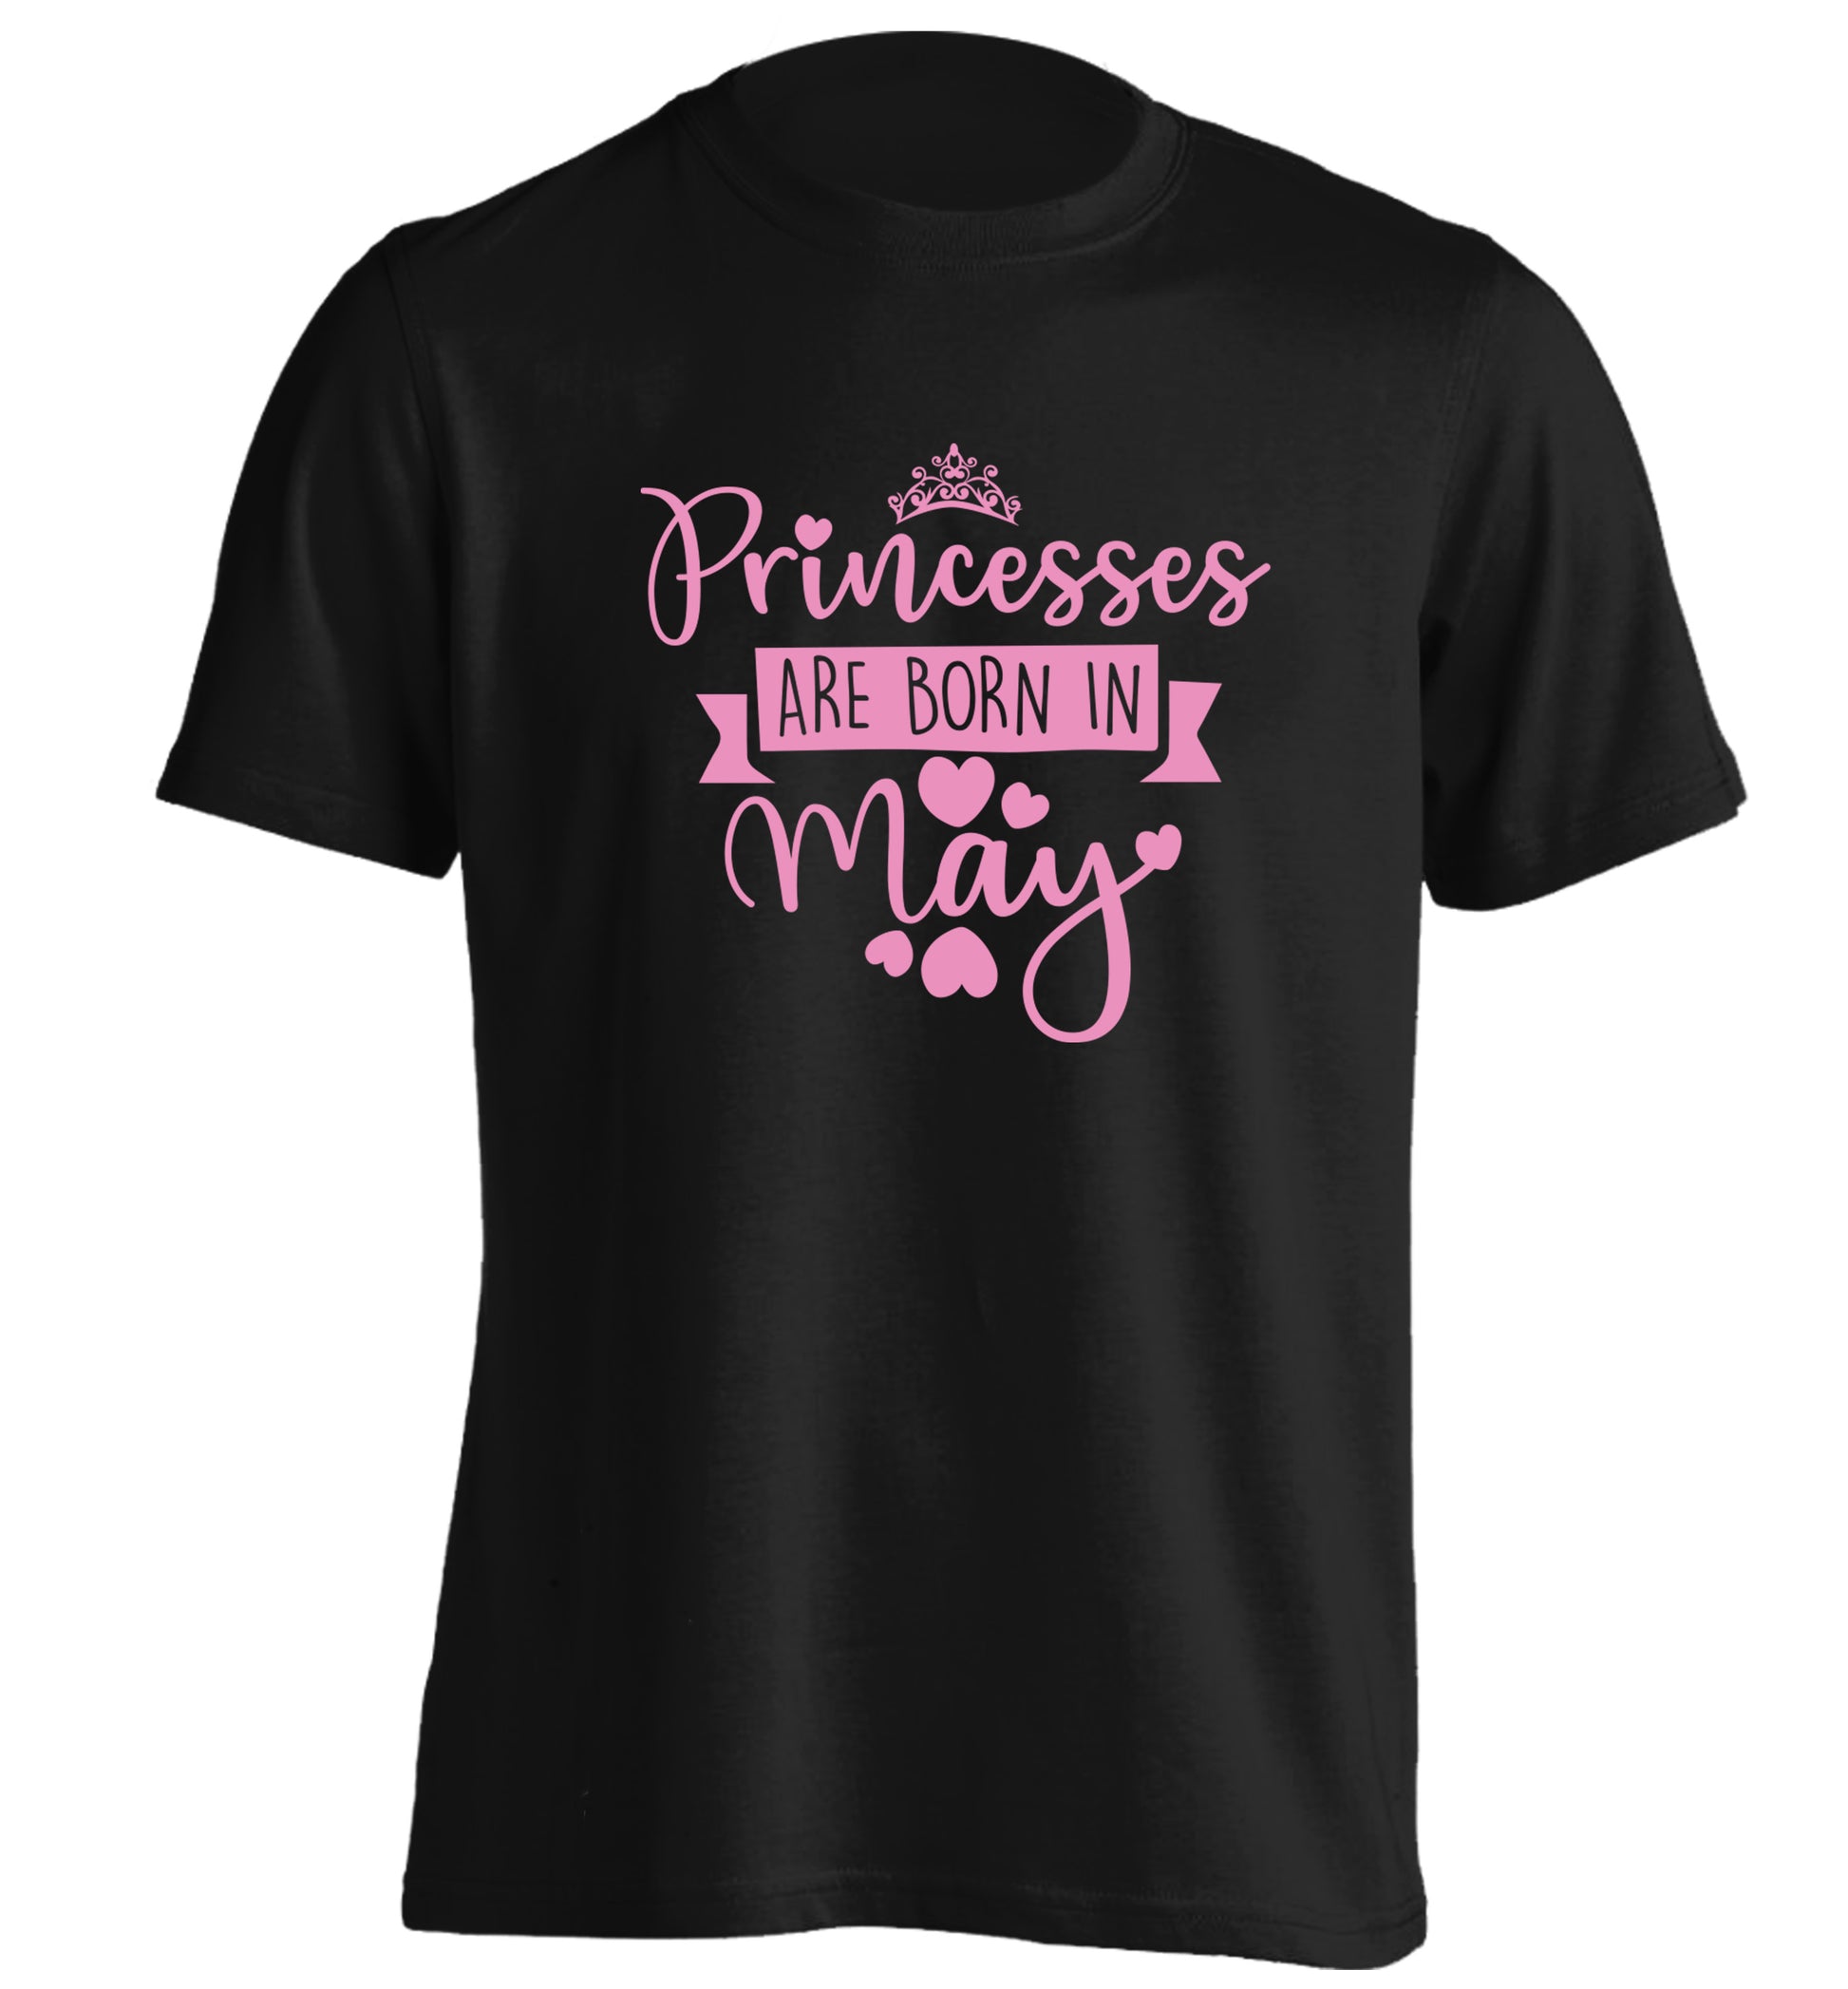 Princesses are born in May adults unisex black Tshirt 2XL